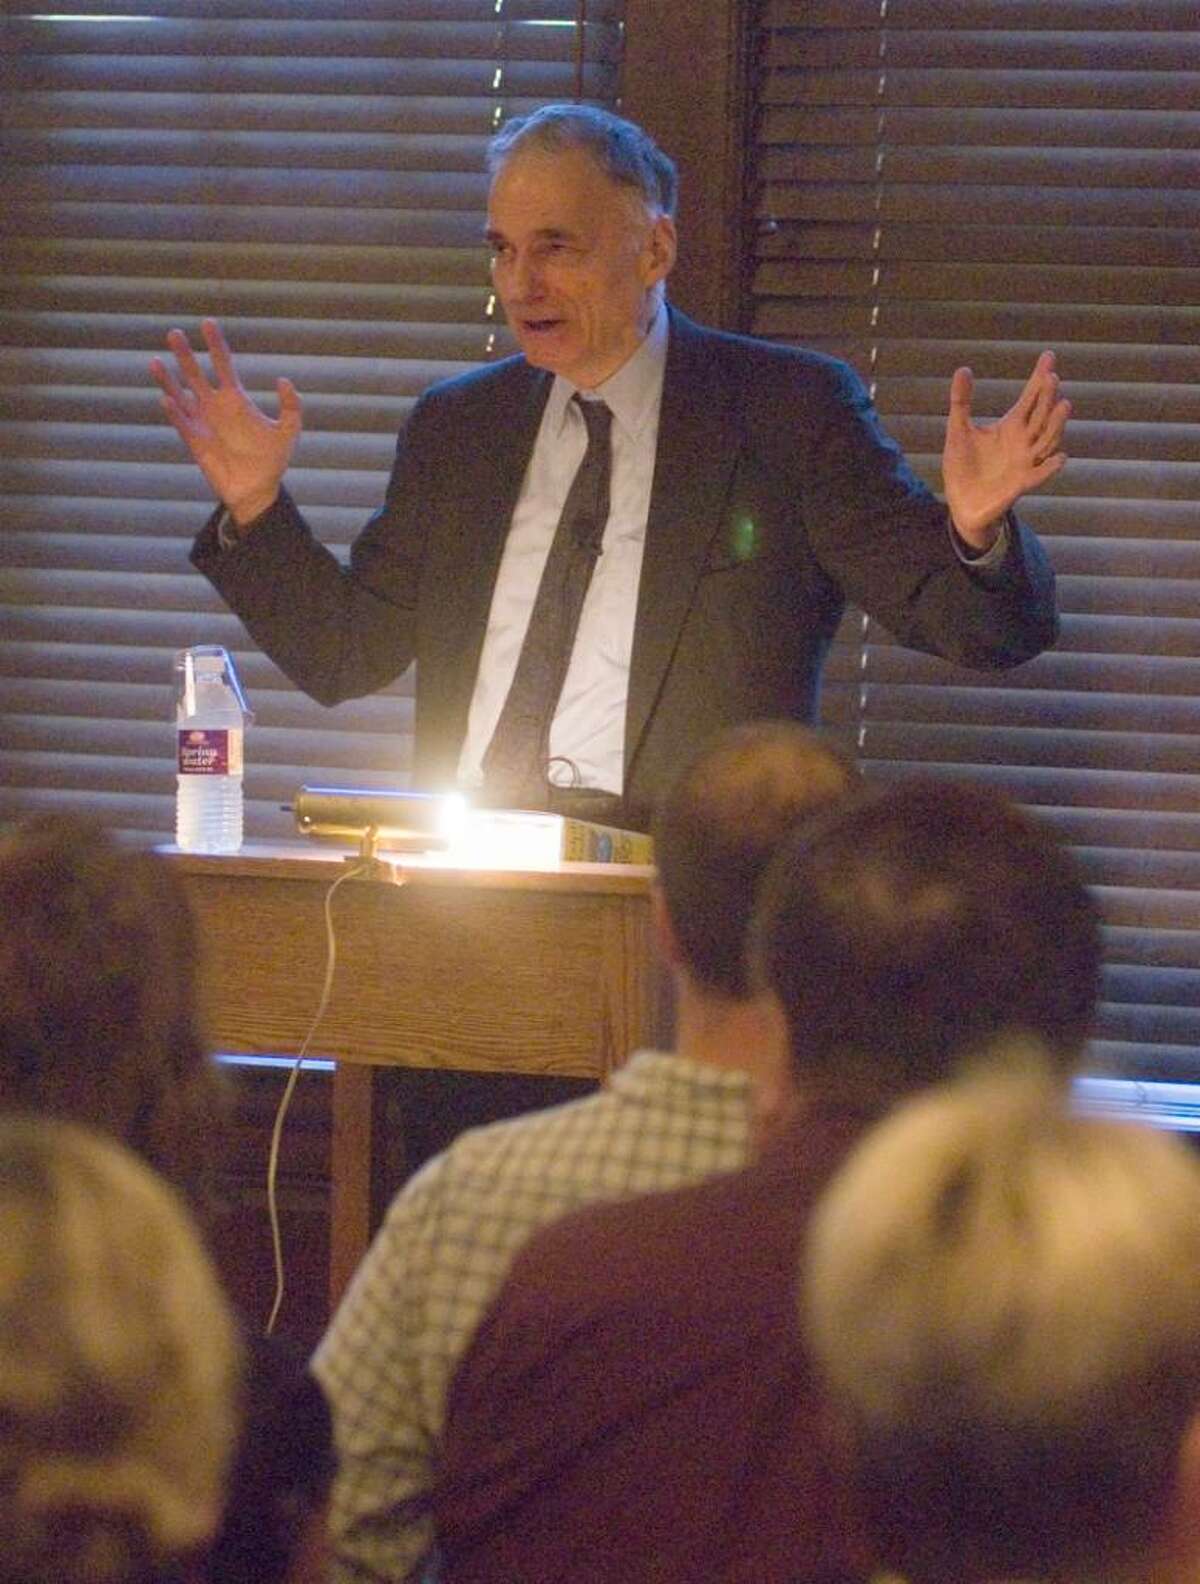 Ralph Nader talks about his new book "Only the super-rich can save us" at the Gunn Memorial Library in Washington on Thursday.